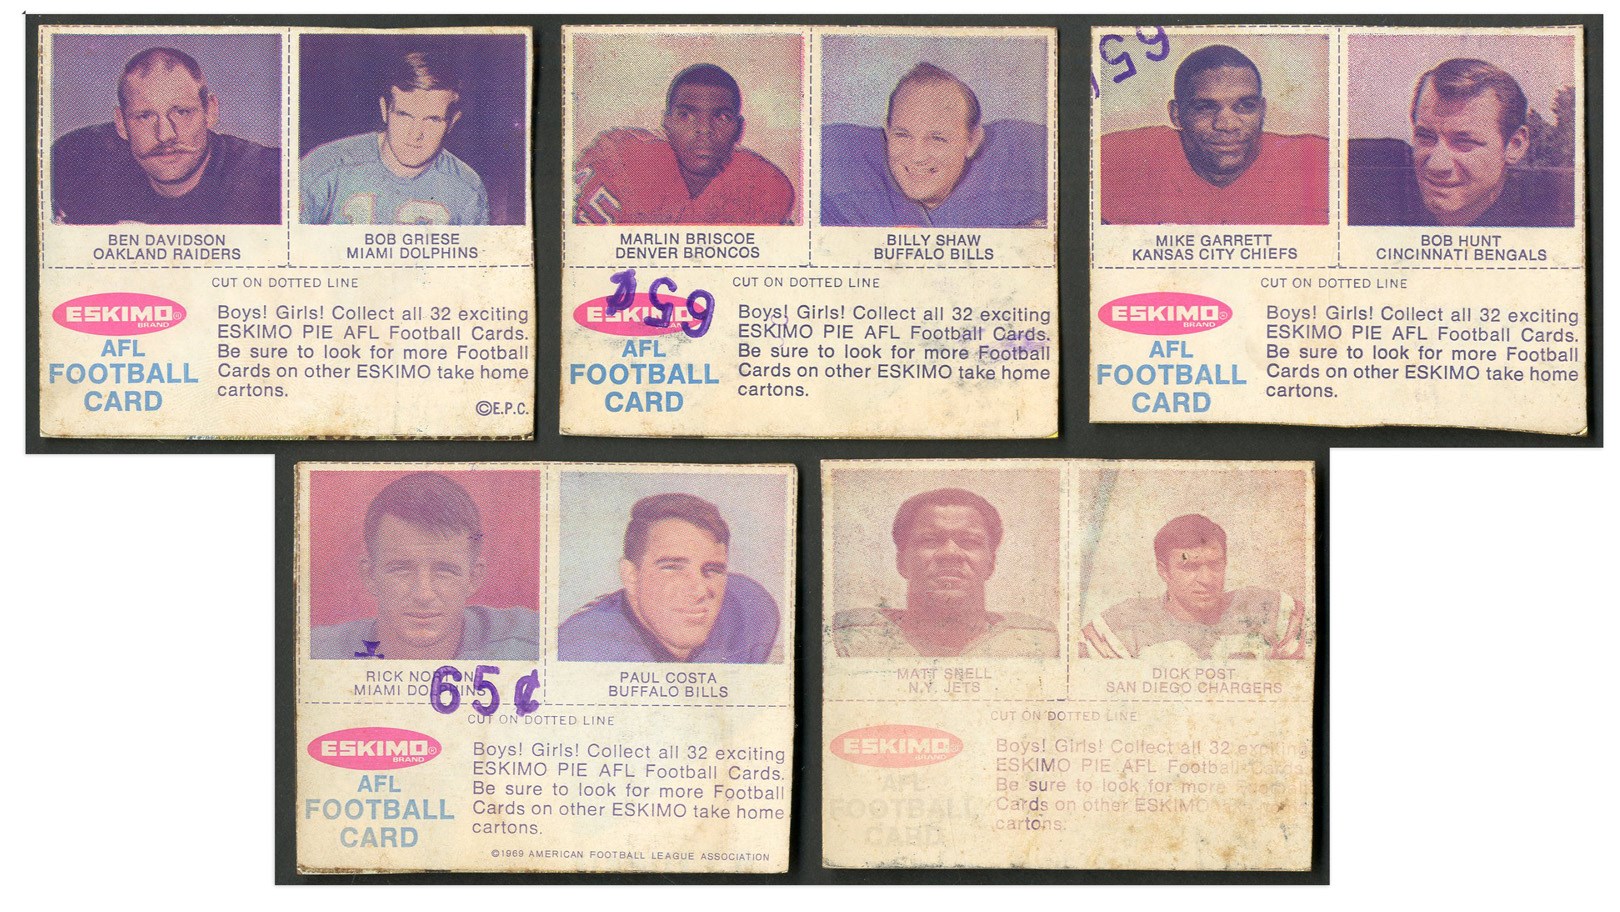 - 1969 Eskimo Pie AFL Football Cards (Lot of 5, with Griese)